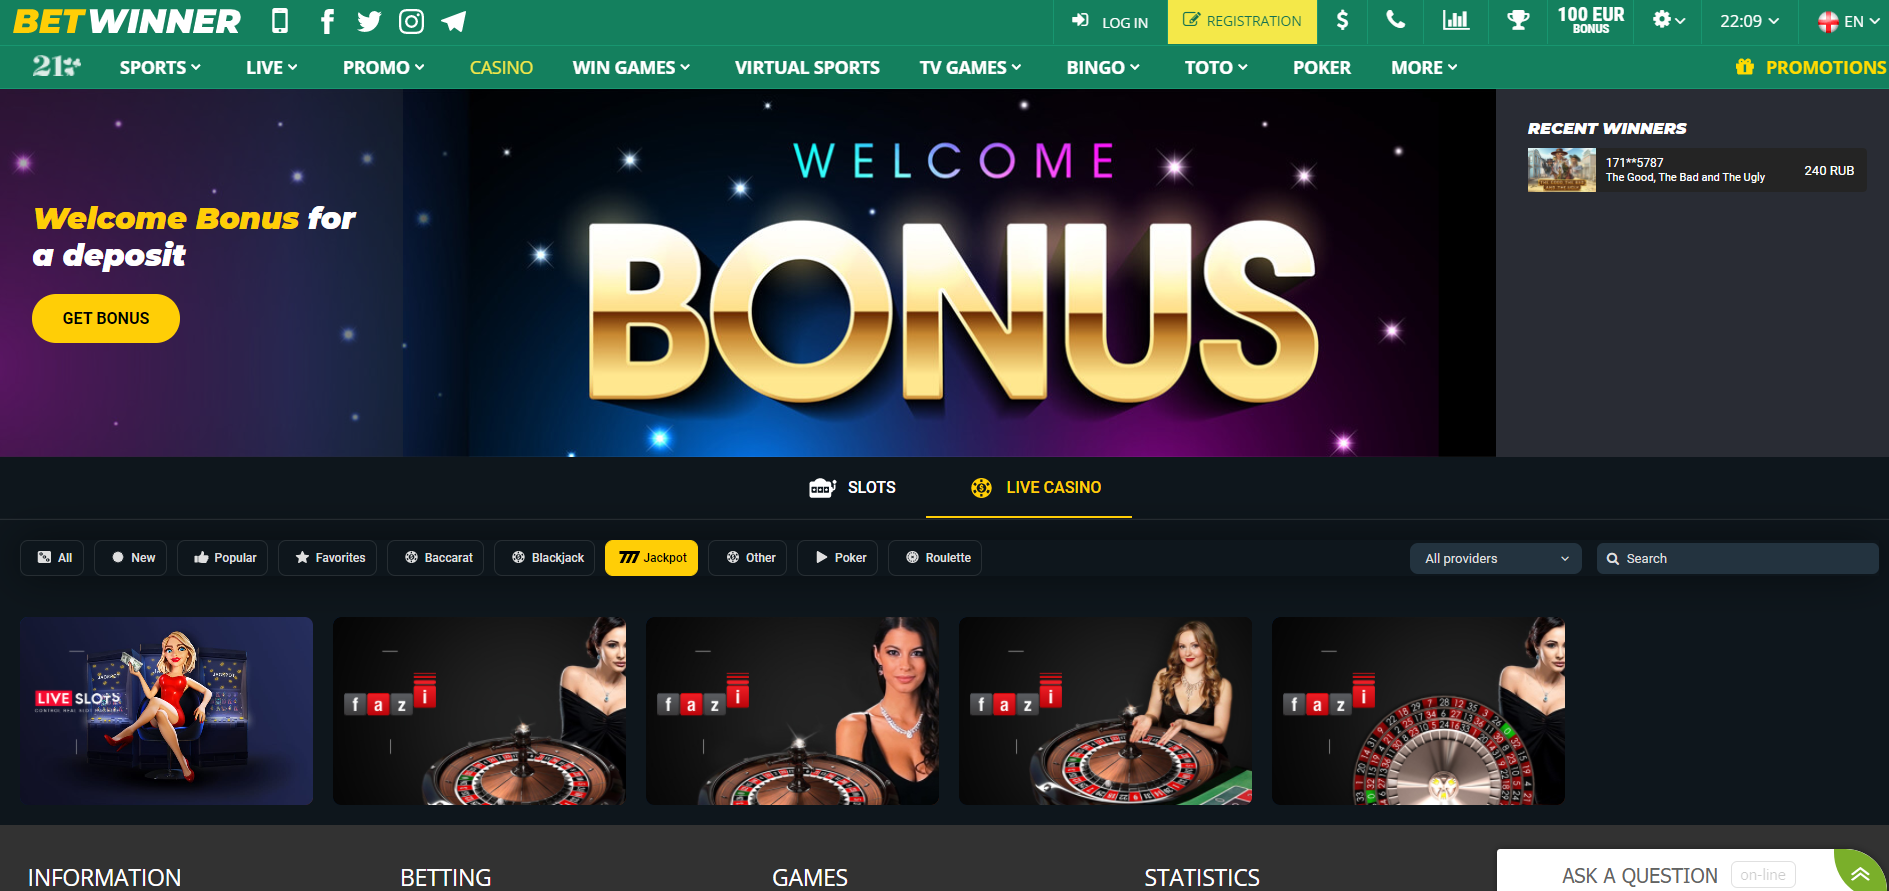 Secrets To Getting betwinner To Complete Tasks Quickly And Efficiently